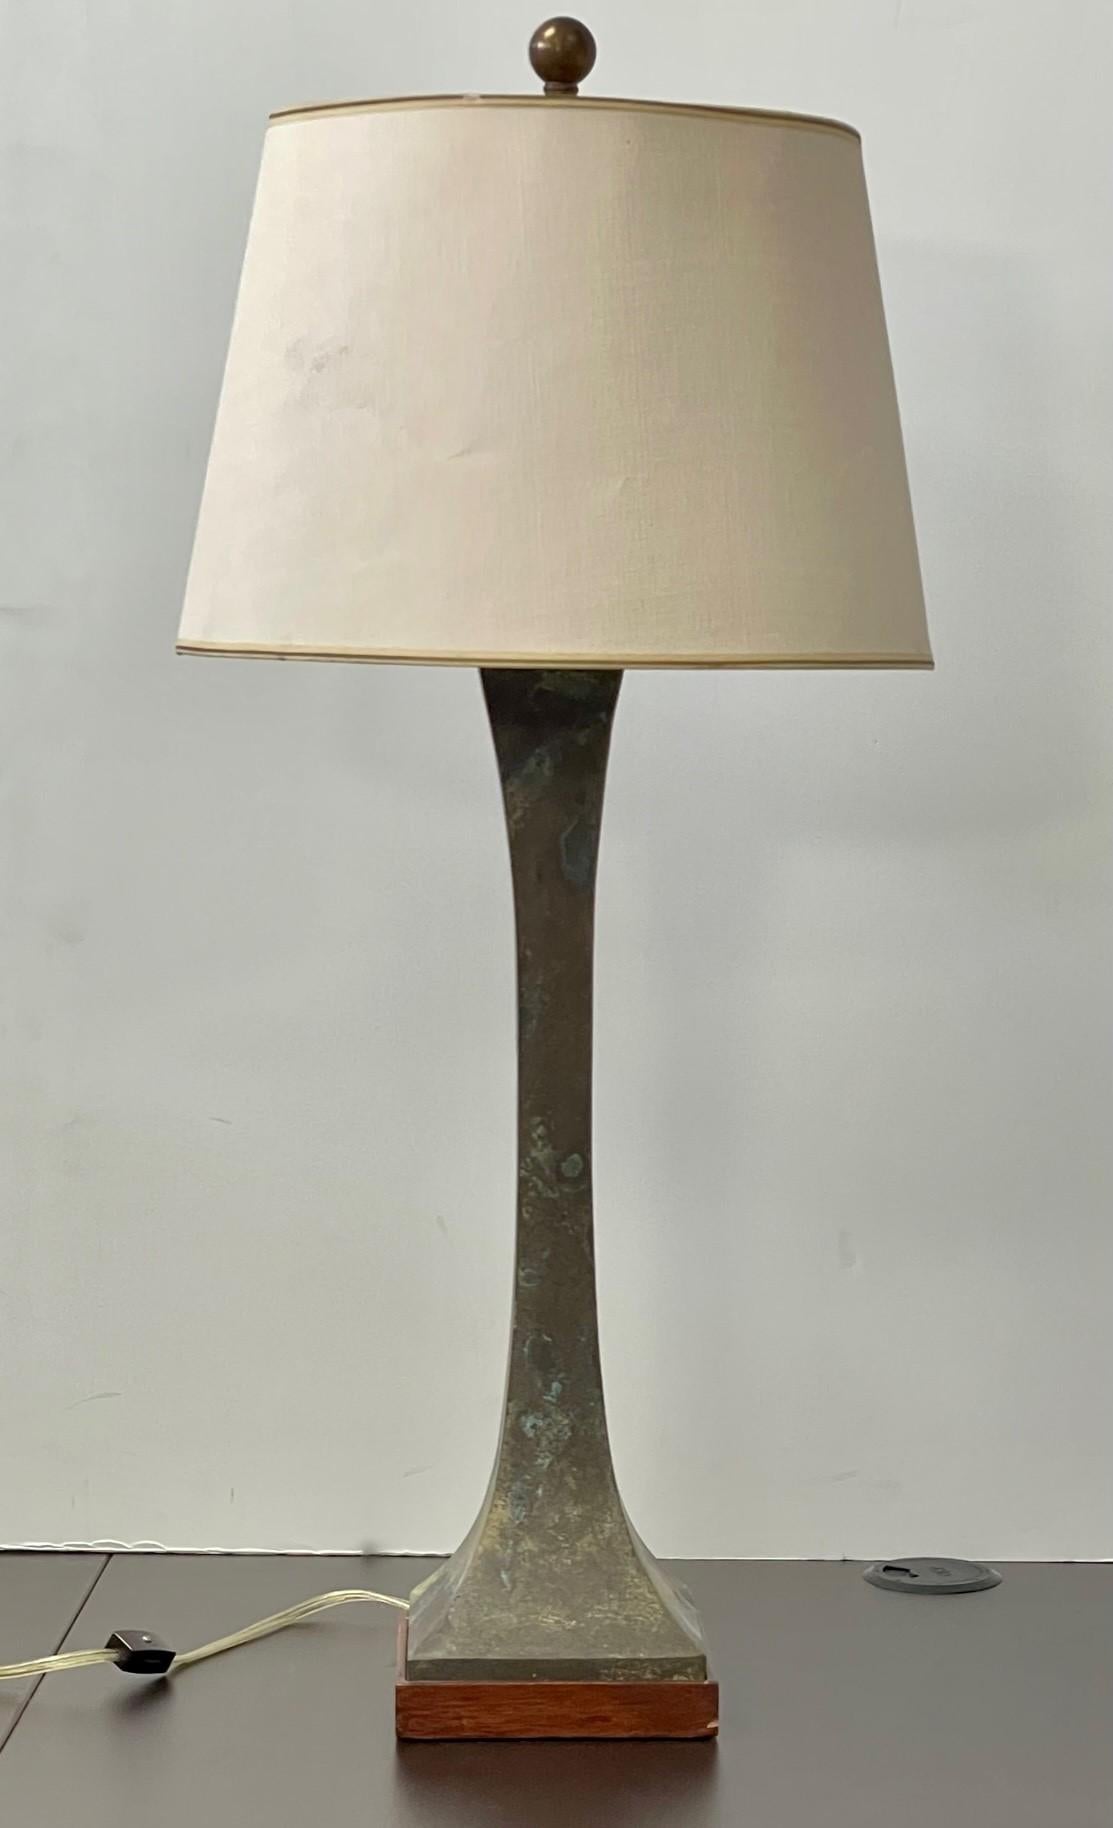 Sculptural square hourglass-form bronze table lamps designed by Stewart Ross James for Hansen Lighting. Sold as a set of 2. The uniquely patinated bronze bases present with a richly varied patina with hues of brown, tan, turquoise and white. On a